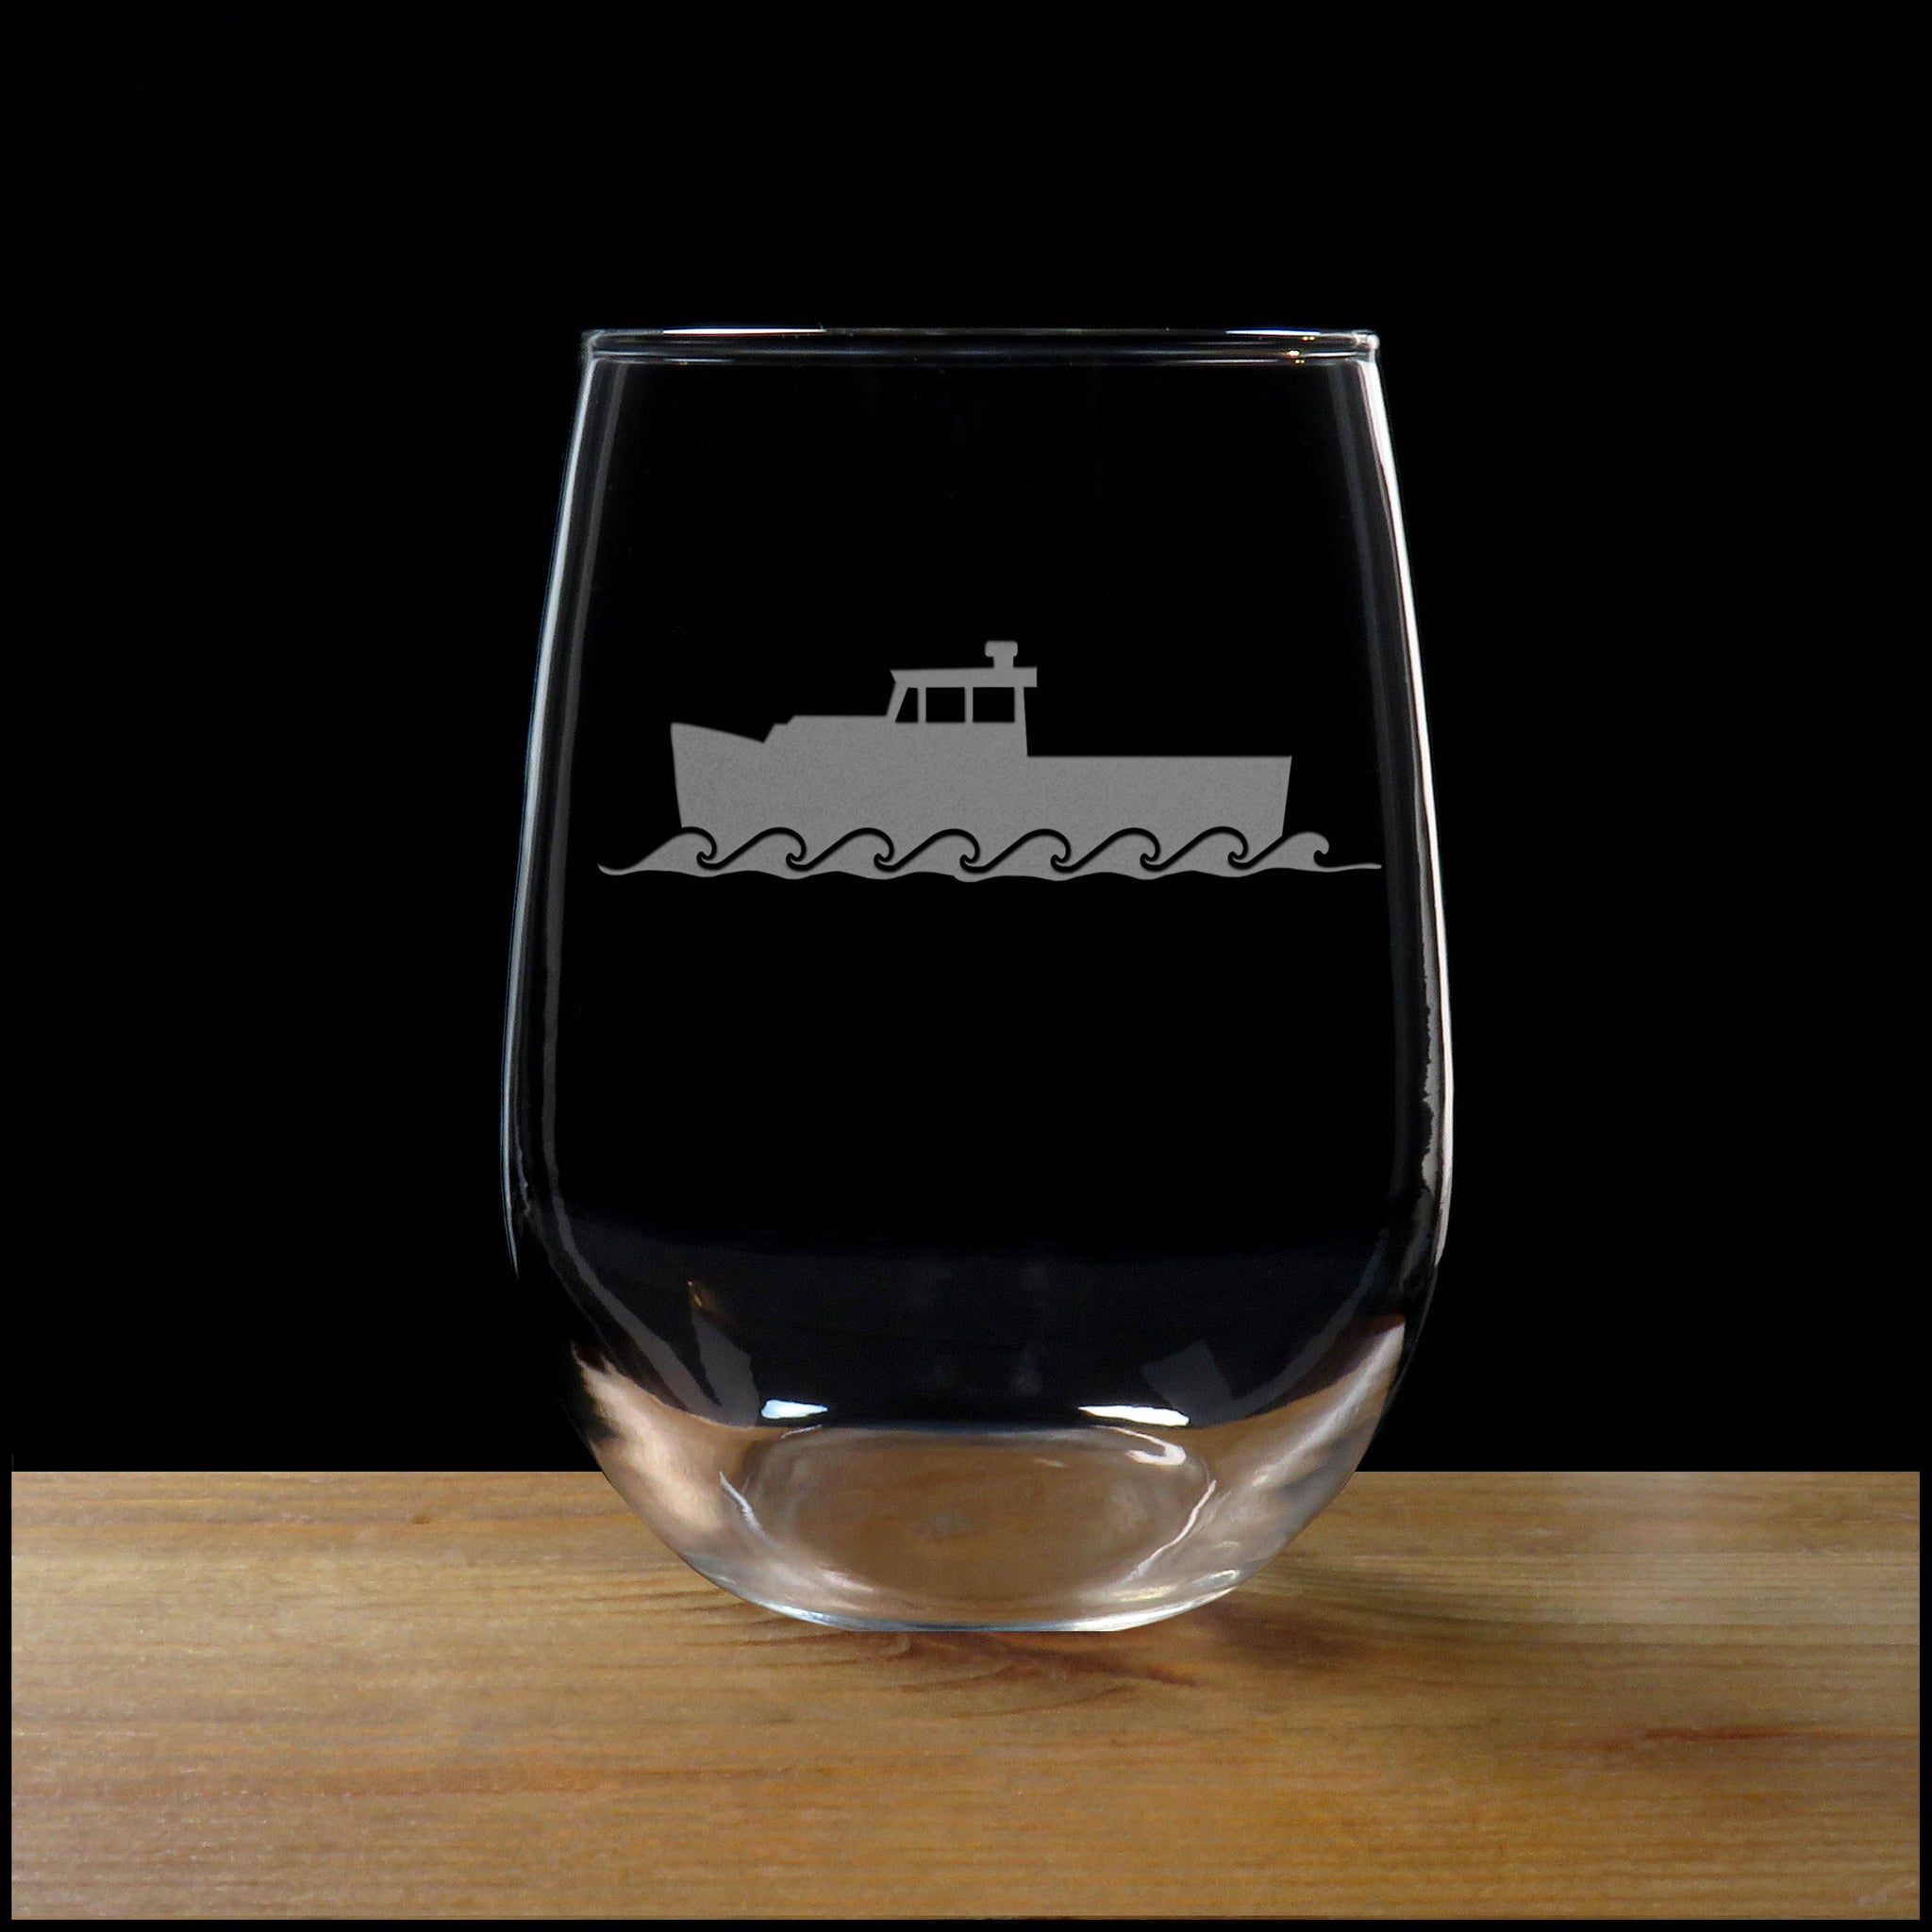 Lobster Boat Stemless Wine Glass - Copyright Hues in Glass